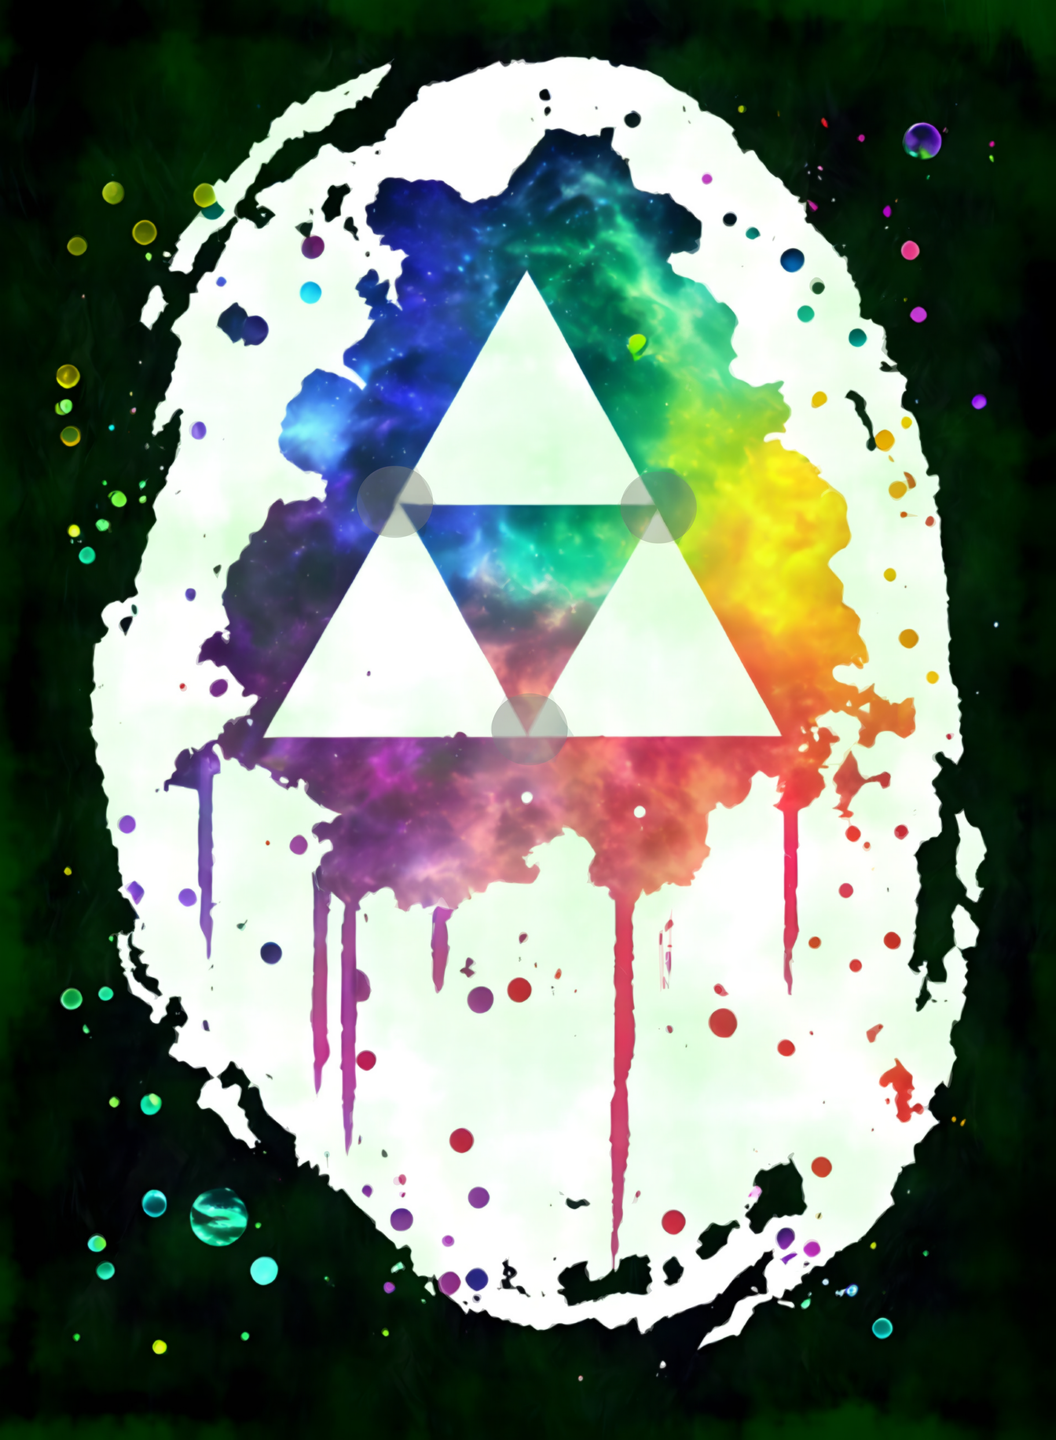 The Cosmic Triforce X